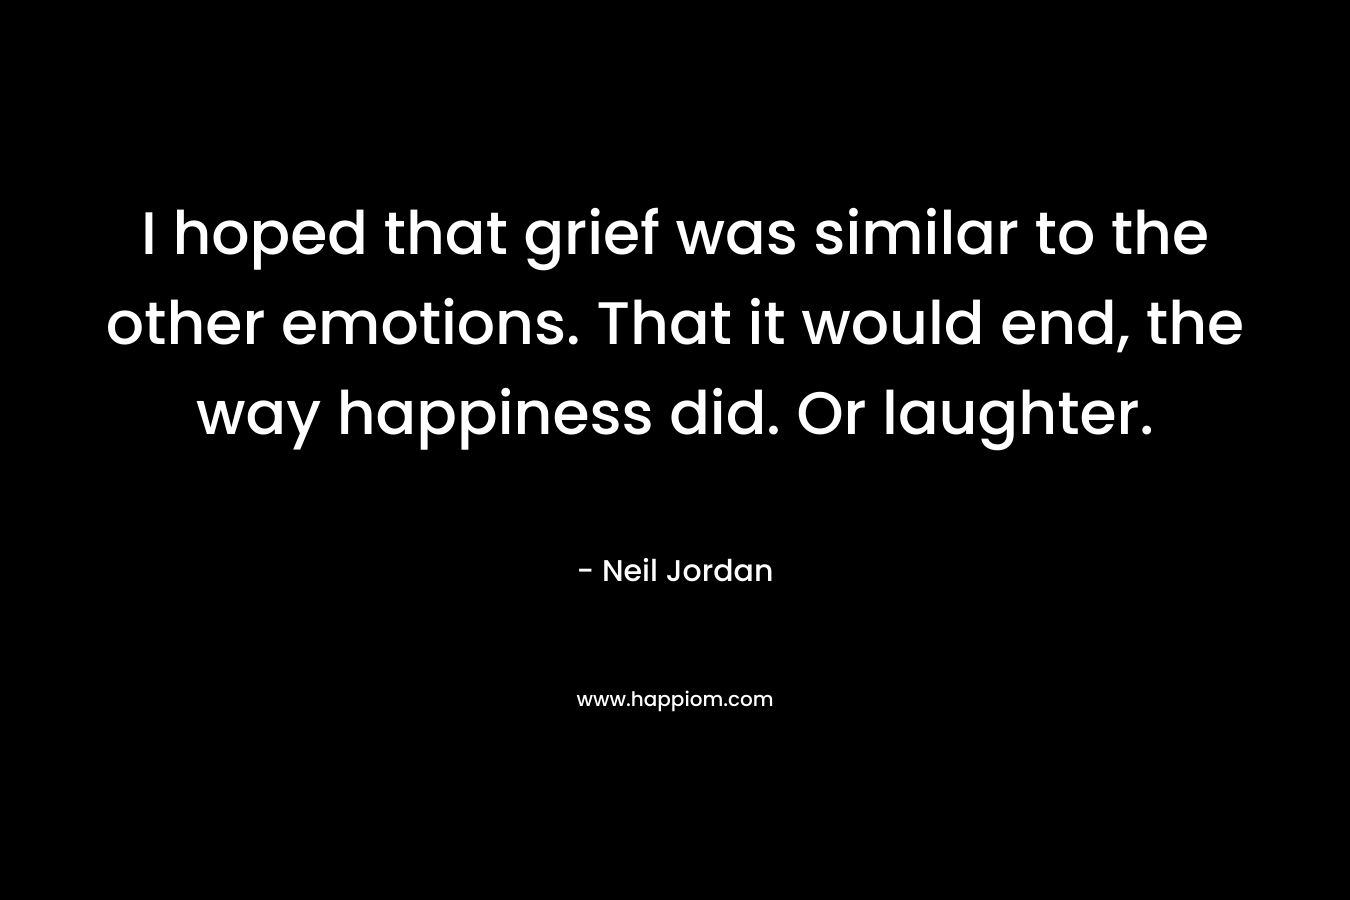 I hoped that grief was similar to the other emotions. That it would end, the way happiness did. Or laughter.